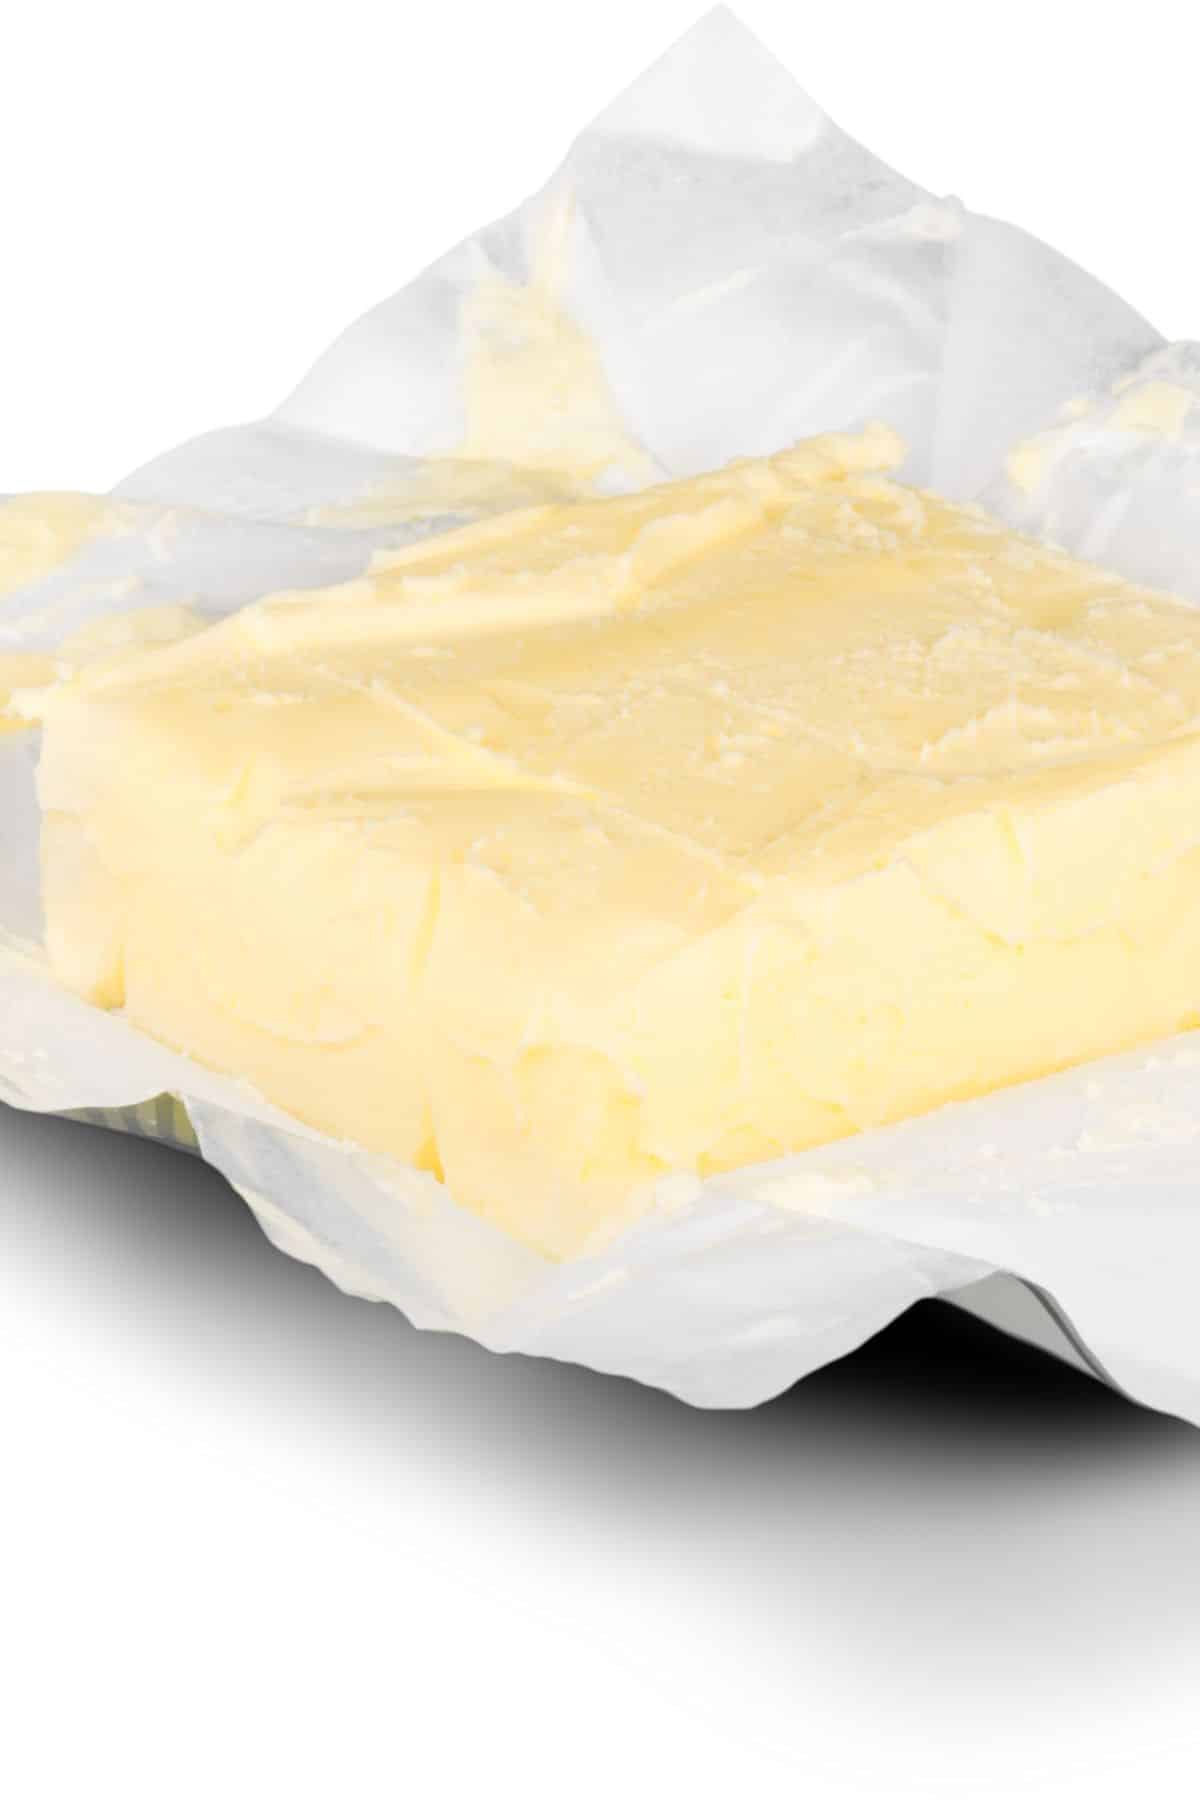 a block of margarine in its wrapper.